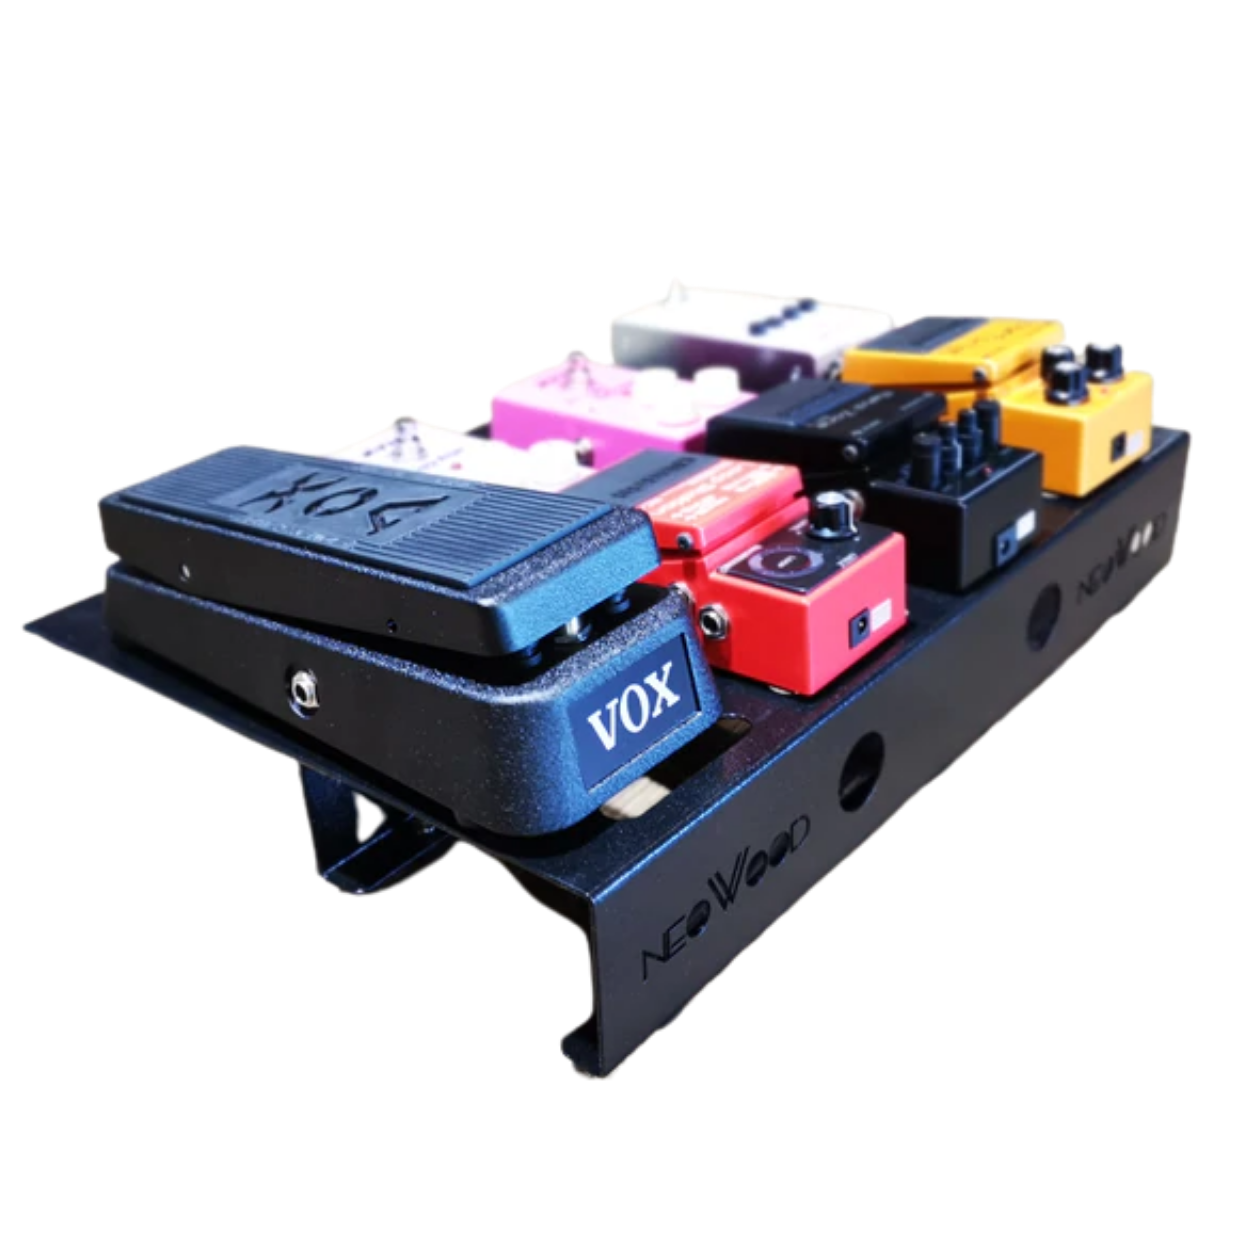 NEOWOOD PB02 PEDALBOARD (FIT UP TO 8 PEDALS)